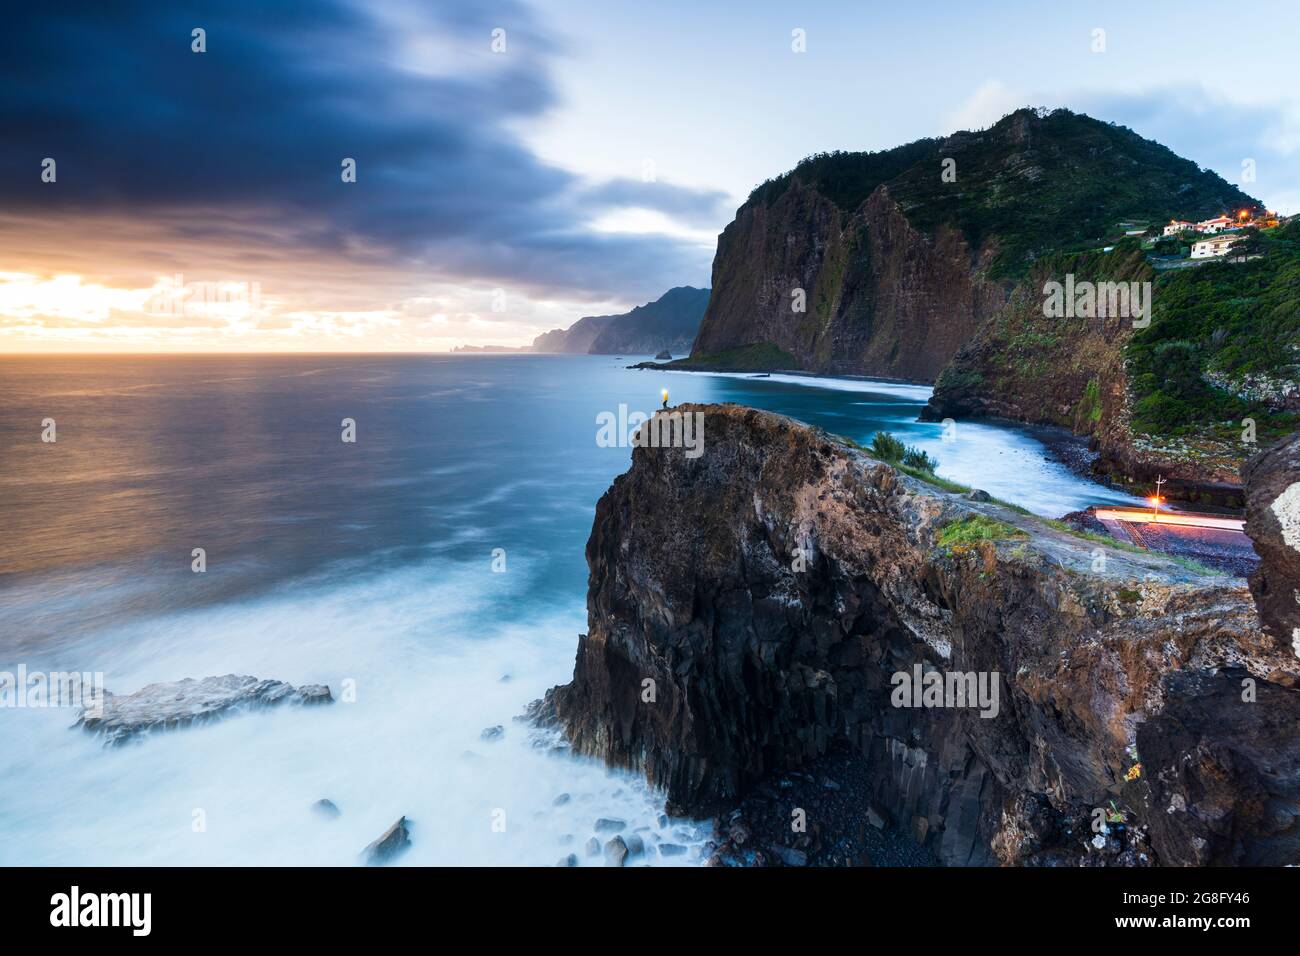 Hiker with head torch admiring the blue hour from cliffs at Miradouro Do Guindaste viewpoint, Madeira island, Portugal, Atlantic, Europe Stock Photo